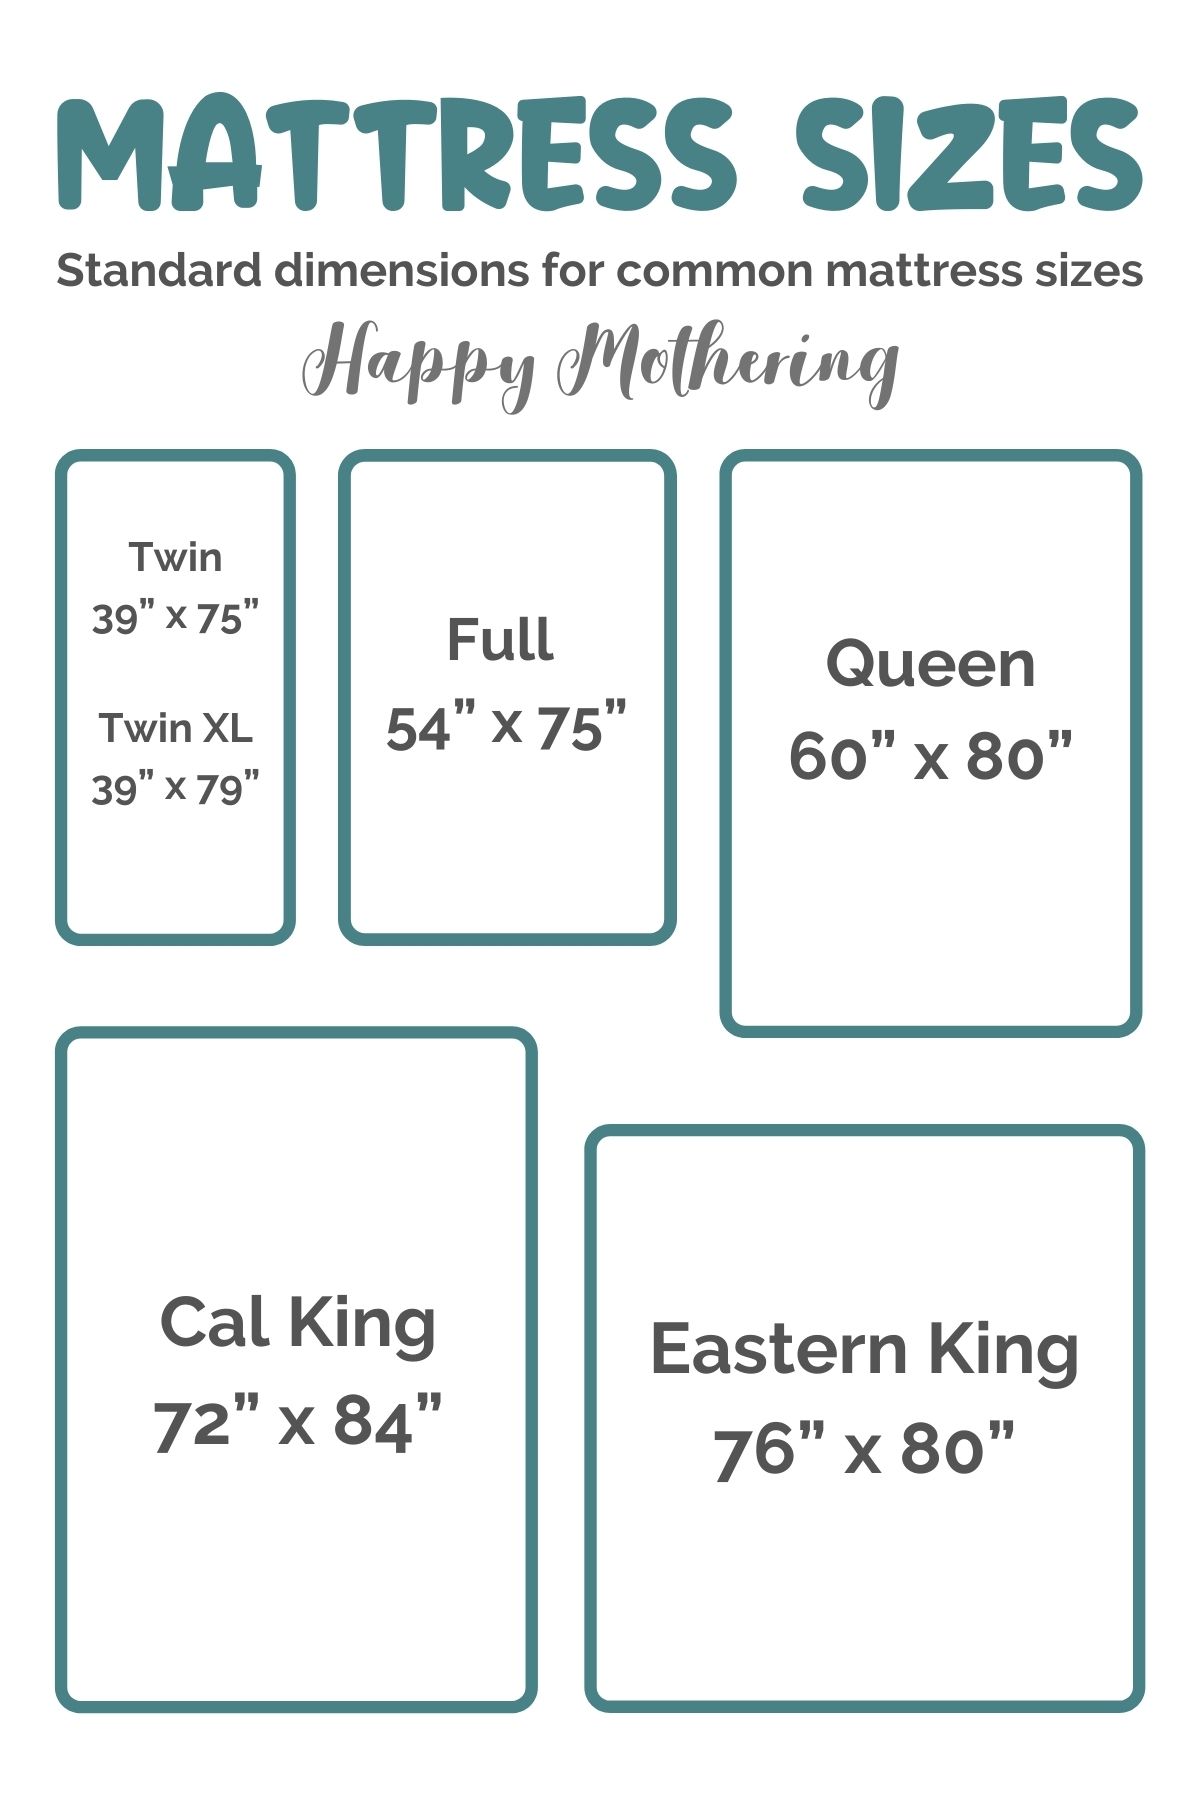 Mattress sizes for twin, full, queen, California king and Eastern King beds.